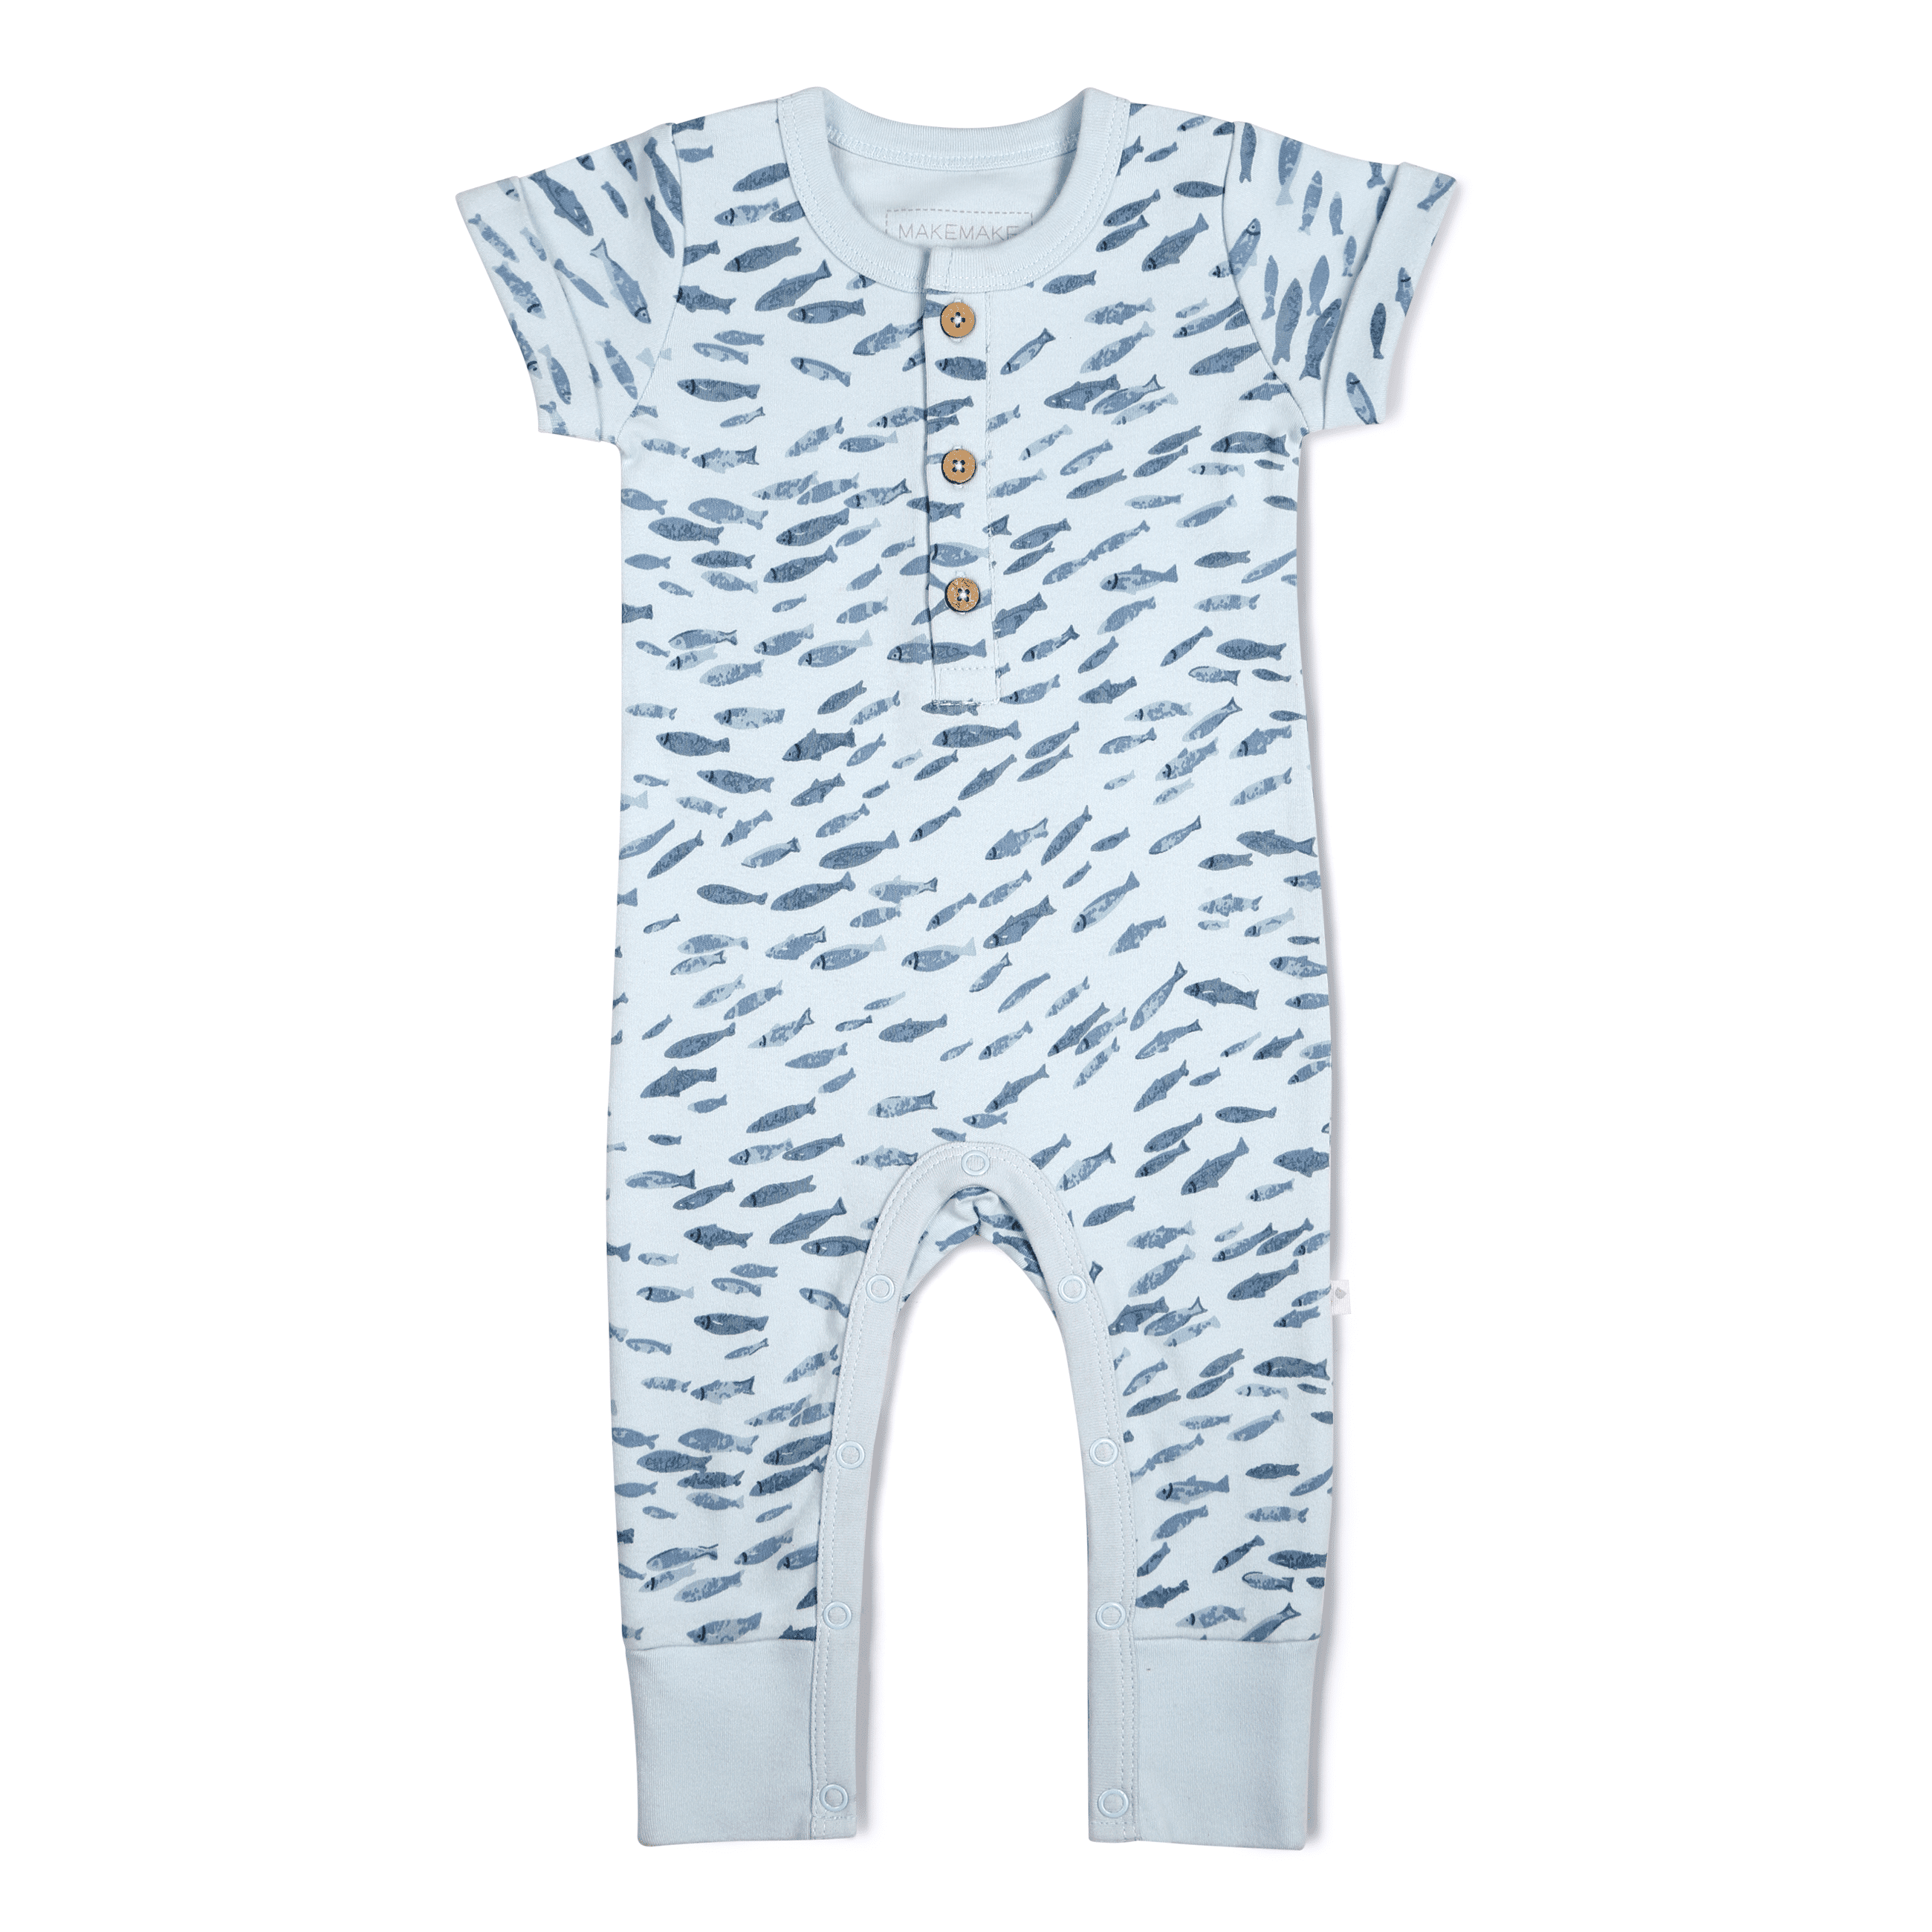 Blue and white Organic Short Sleeve Button Romper by Makemake Organics with an all-over feather print, featuring short sleeves and snap buttons for easy dressing, displayed on a white background. Suitable for a baby boy.